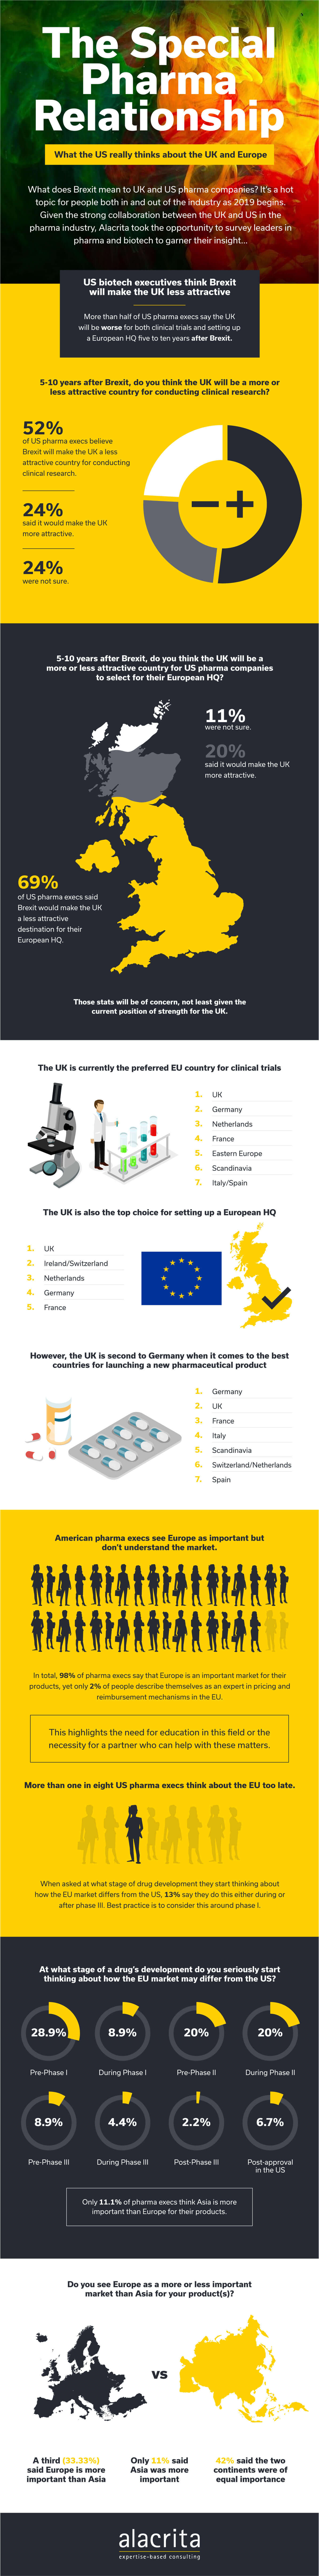 US Pharma executive opinions on Europe and Brexit